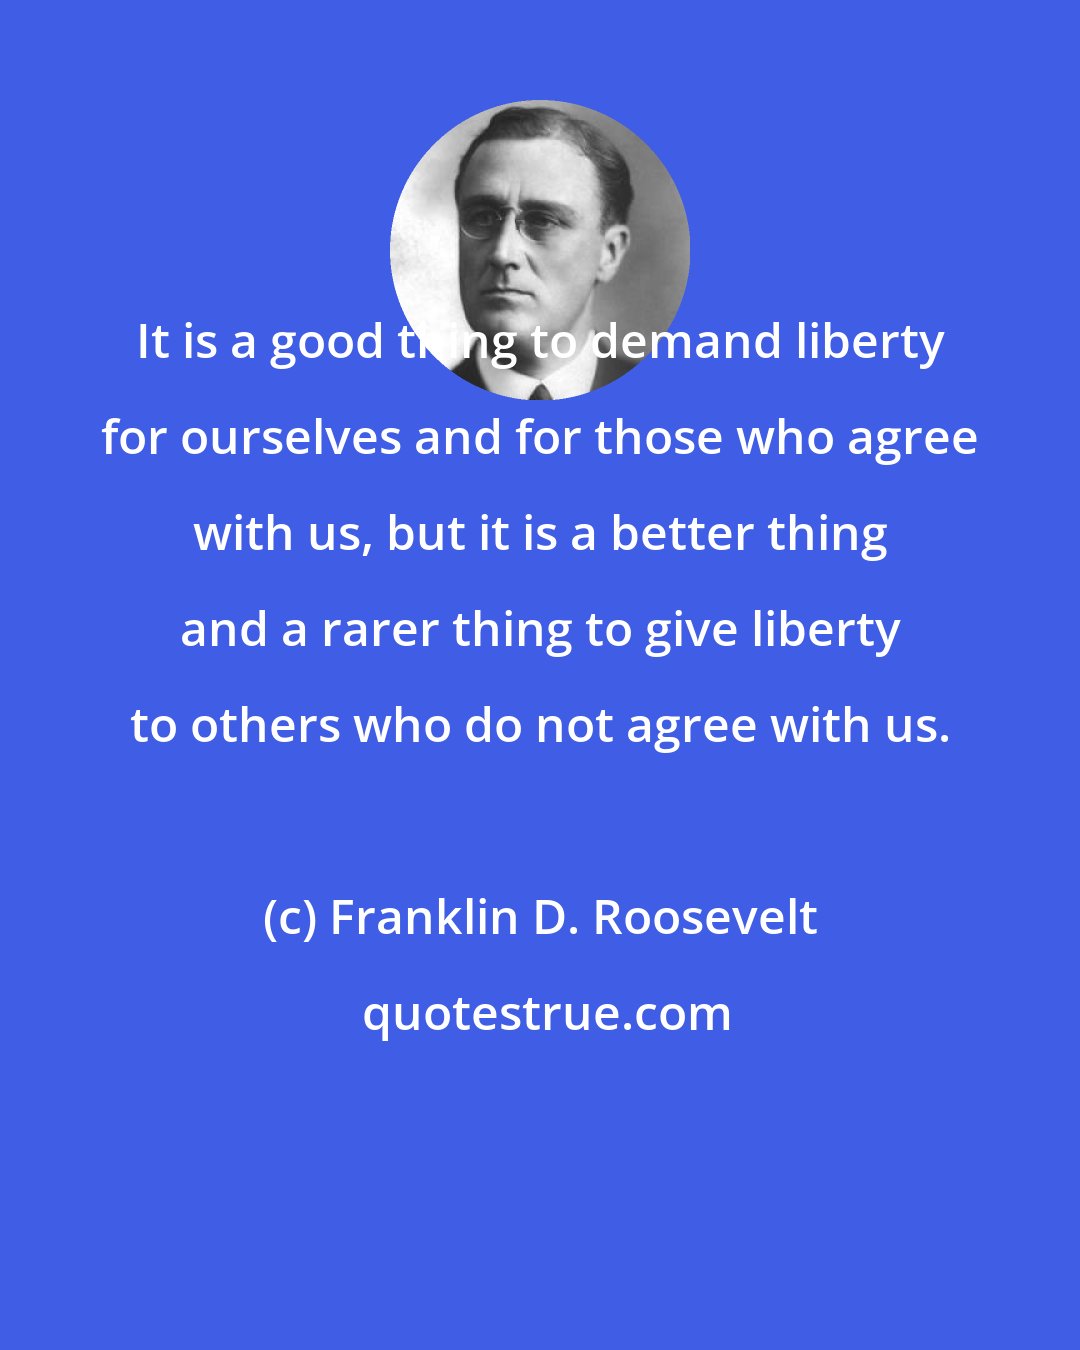 Franklin D. Roosevelt: It is a good thing to demand liberty for ourselves and for those who agree with us, but it is a better thing and a rarer thing to give liberty to others who do not agree with us.